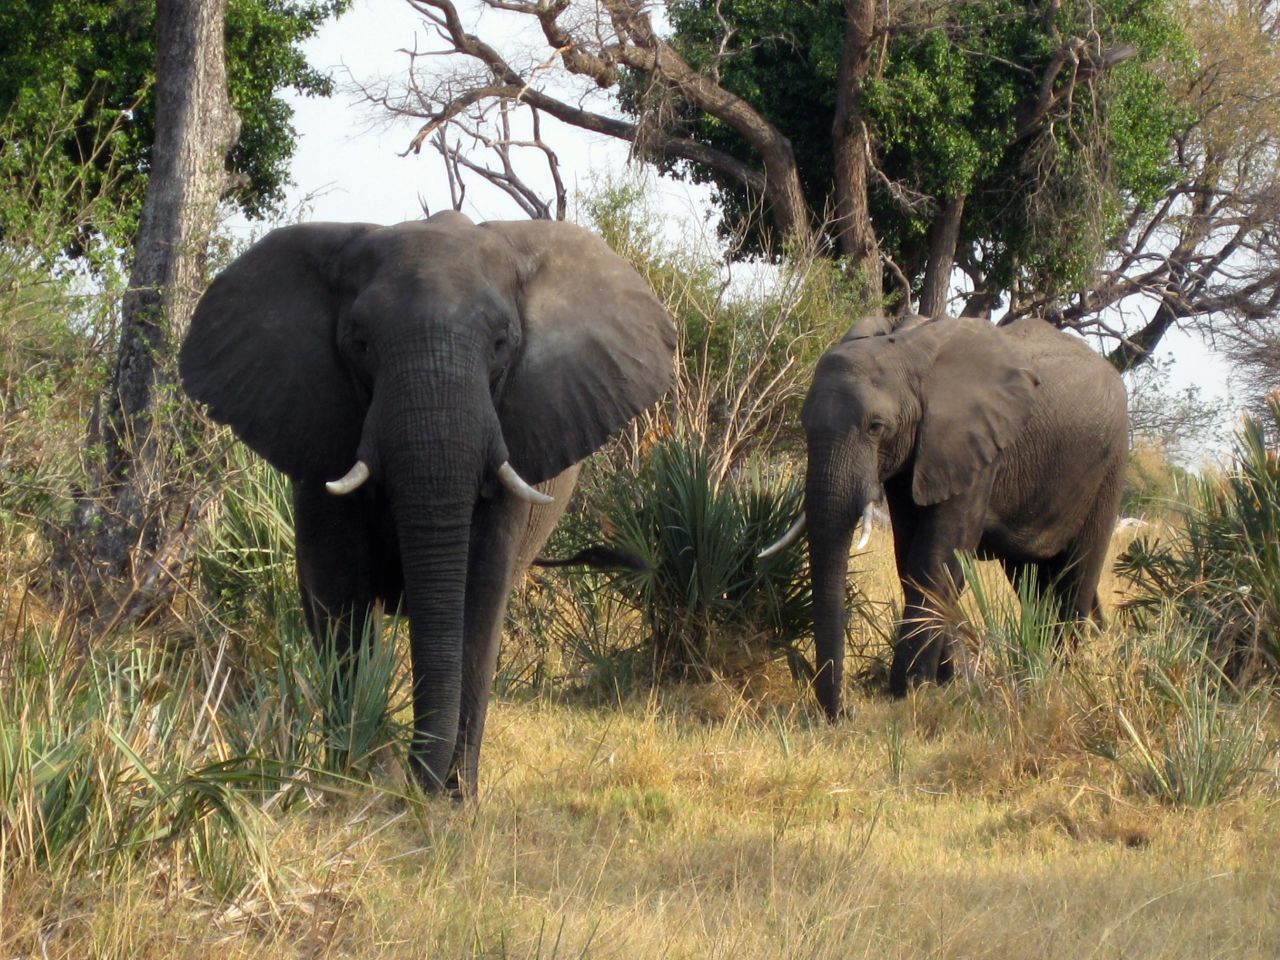 Elephants are among the likely animal sightings on the delta.